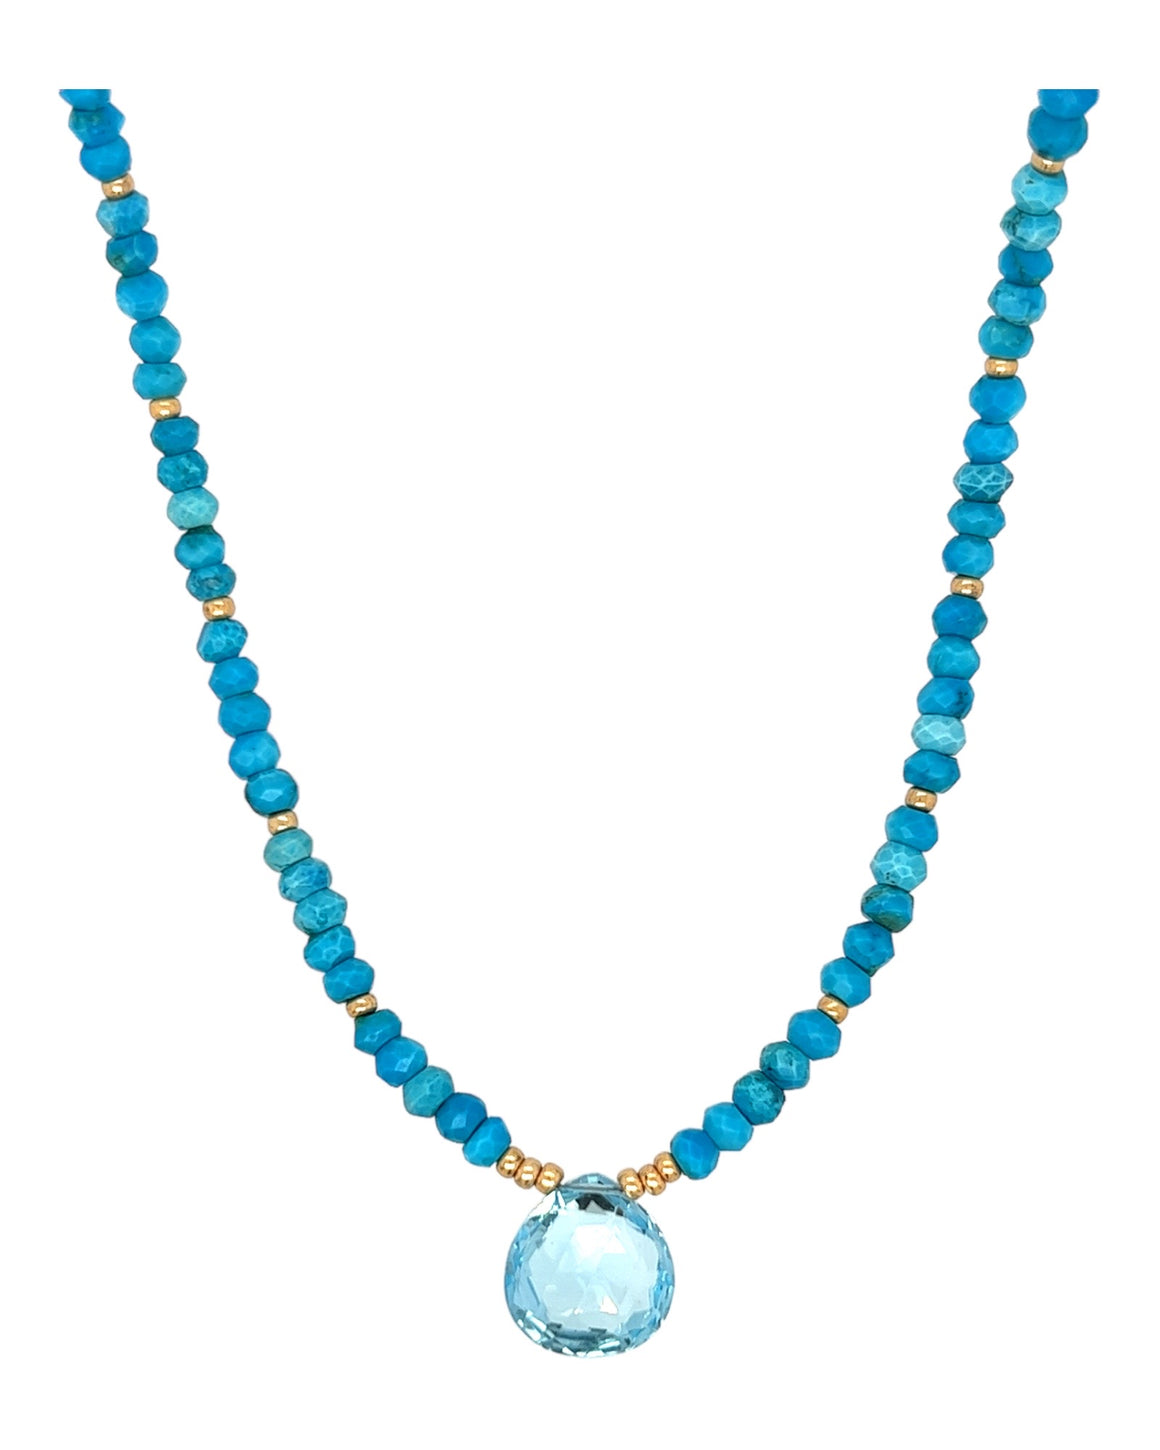 Faceted Genuine Turquoise Necklace w/ Blue Topaz